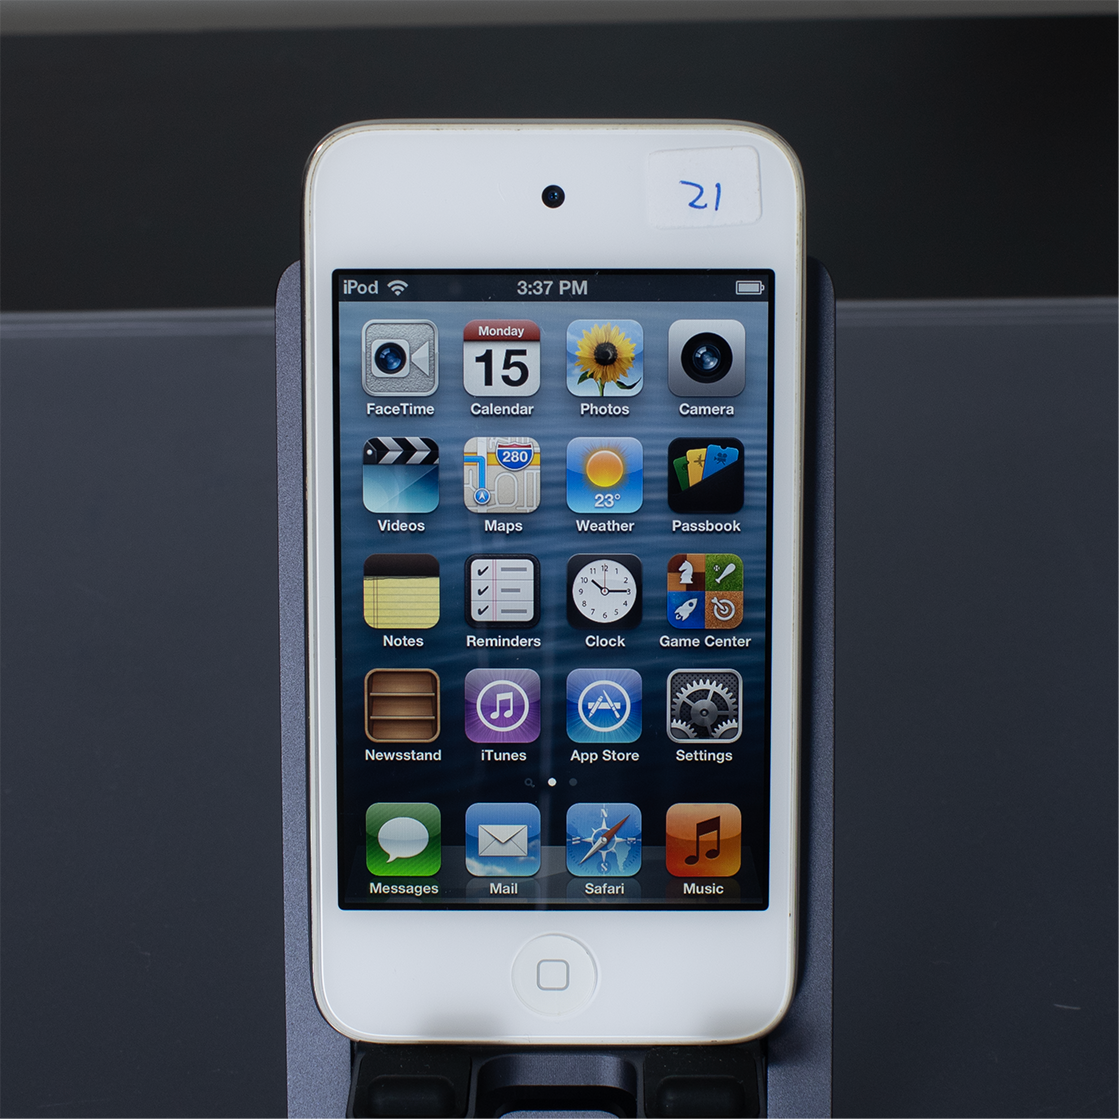 iPod Touch 4 - 16GB - iOS 6.1.6 - Good condition